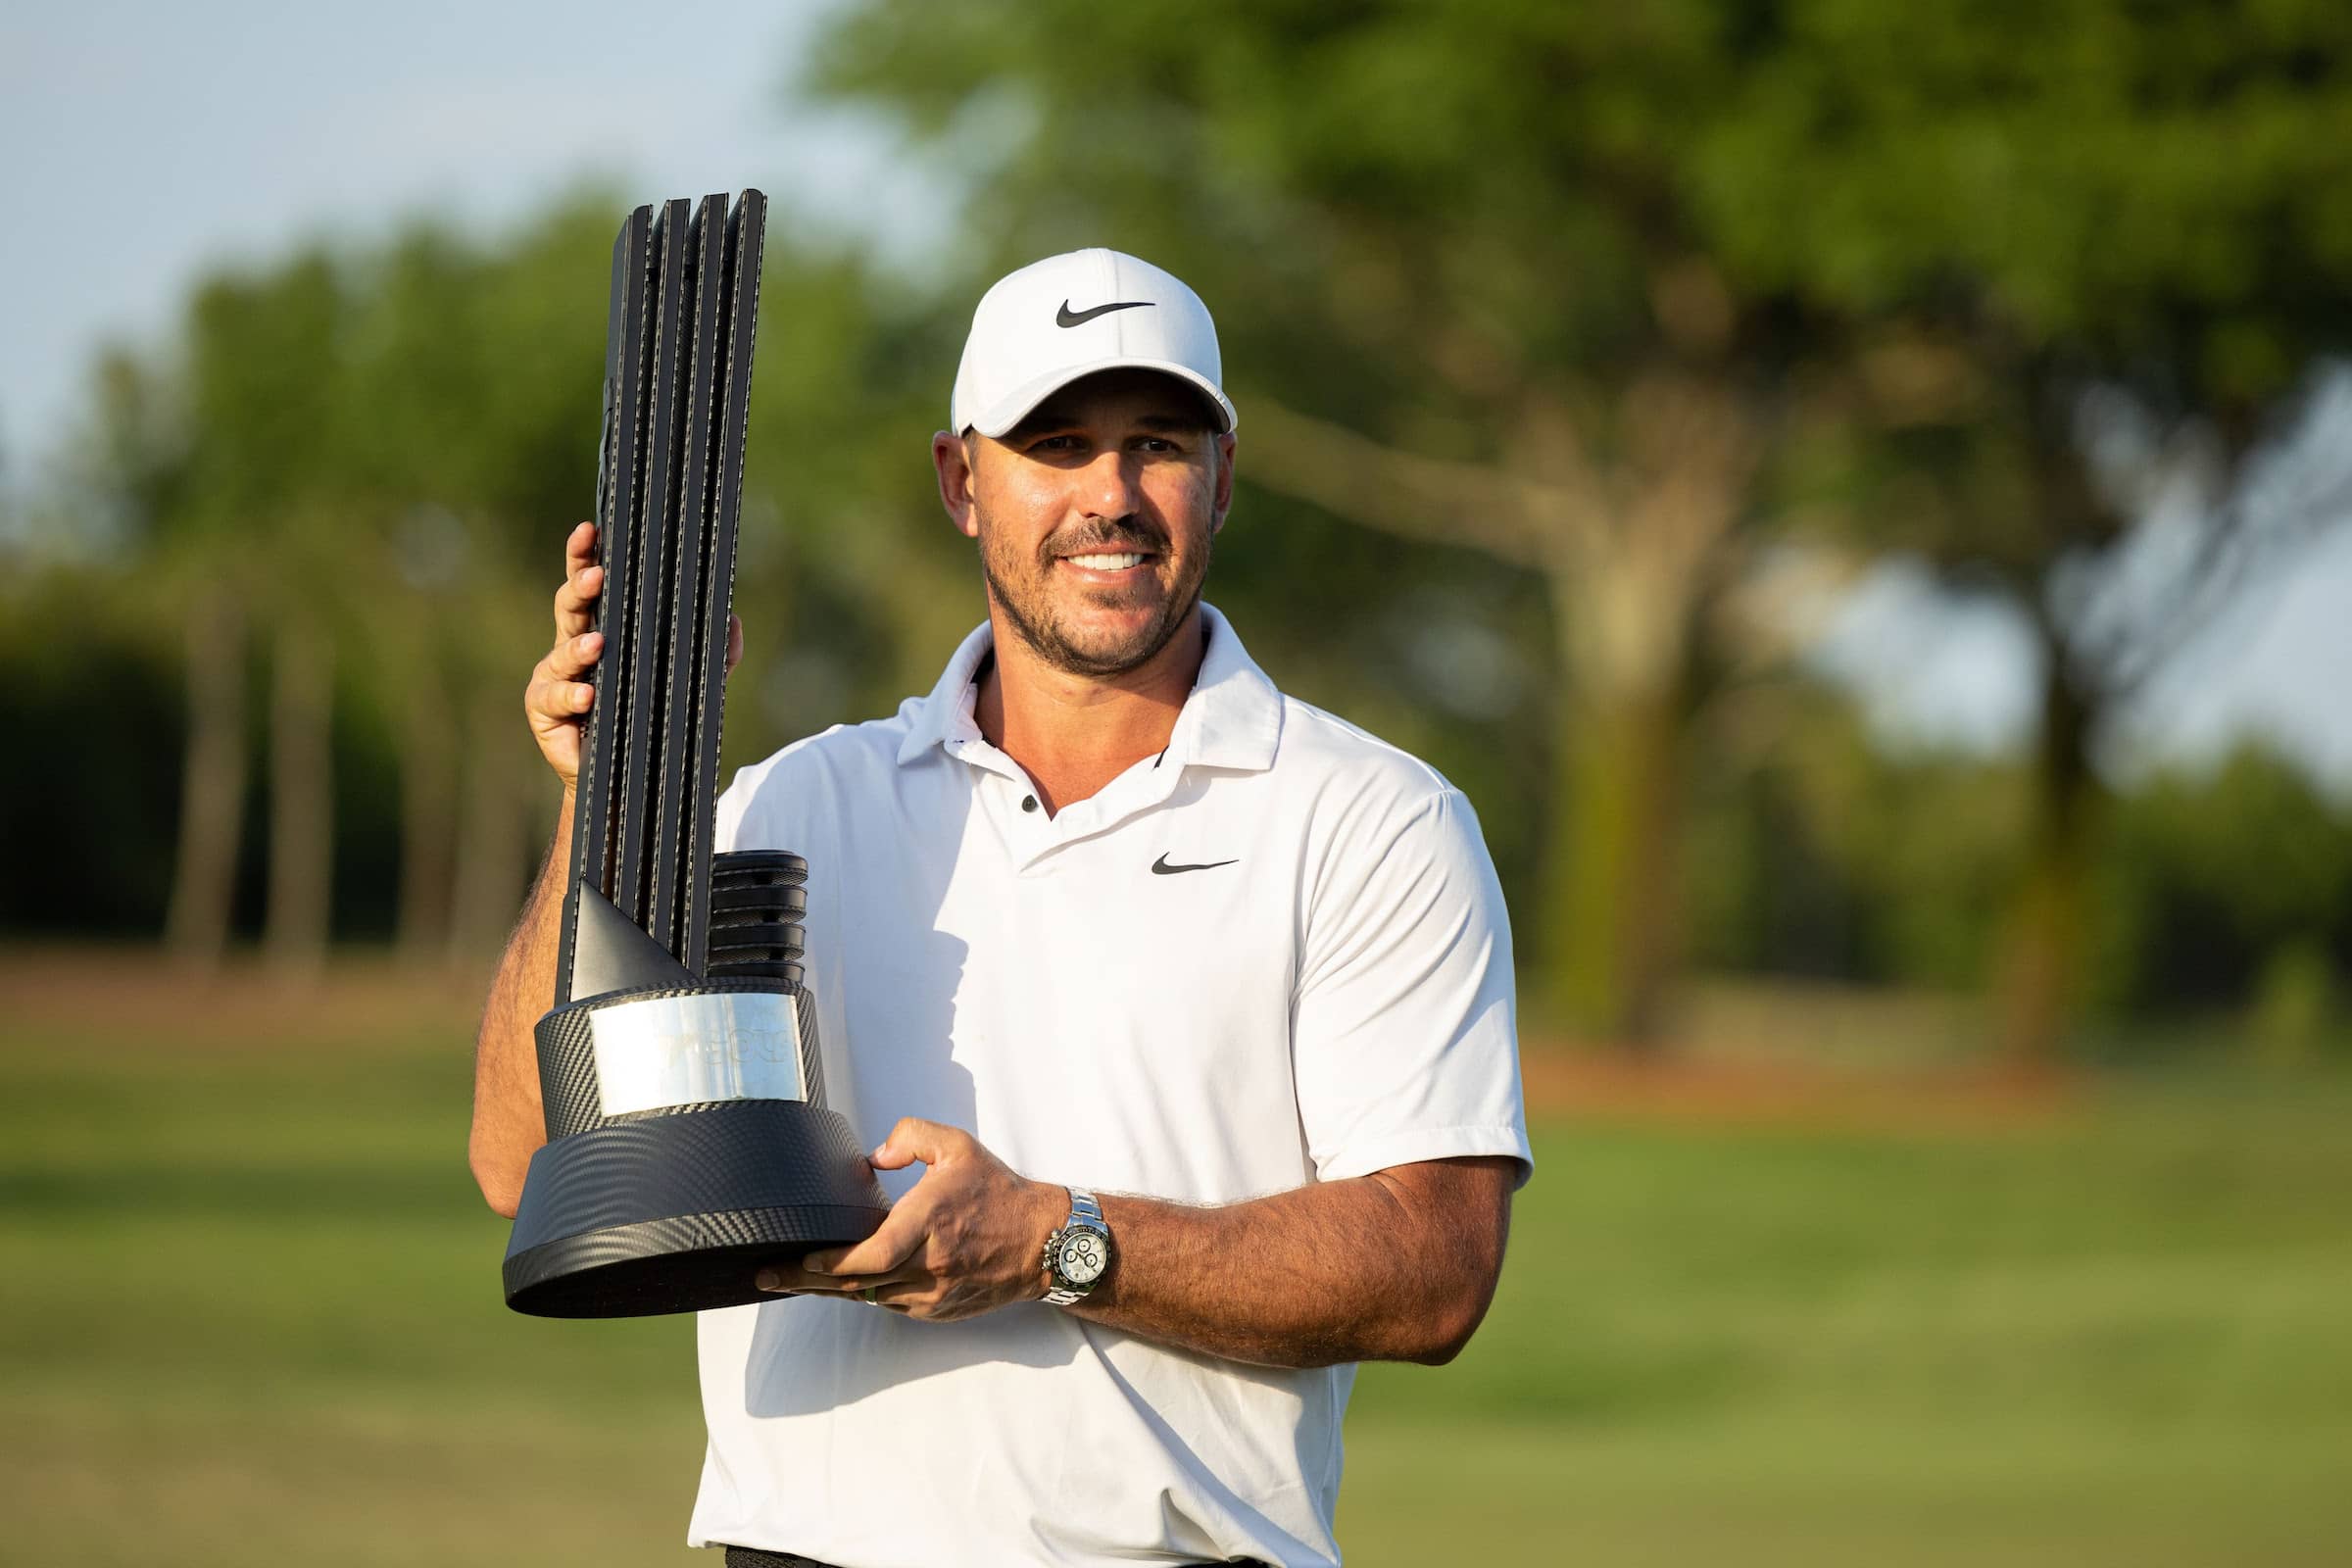 Brooks koepka of smash gc is the first player in liv golf history to win multiple individual titles